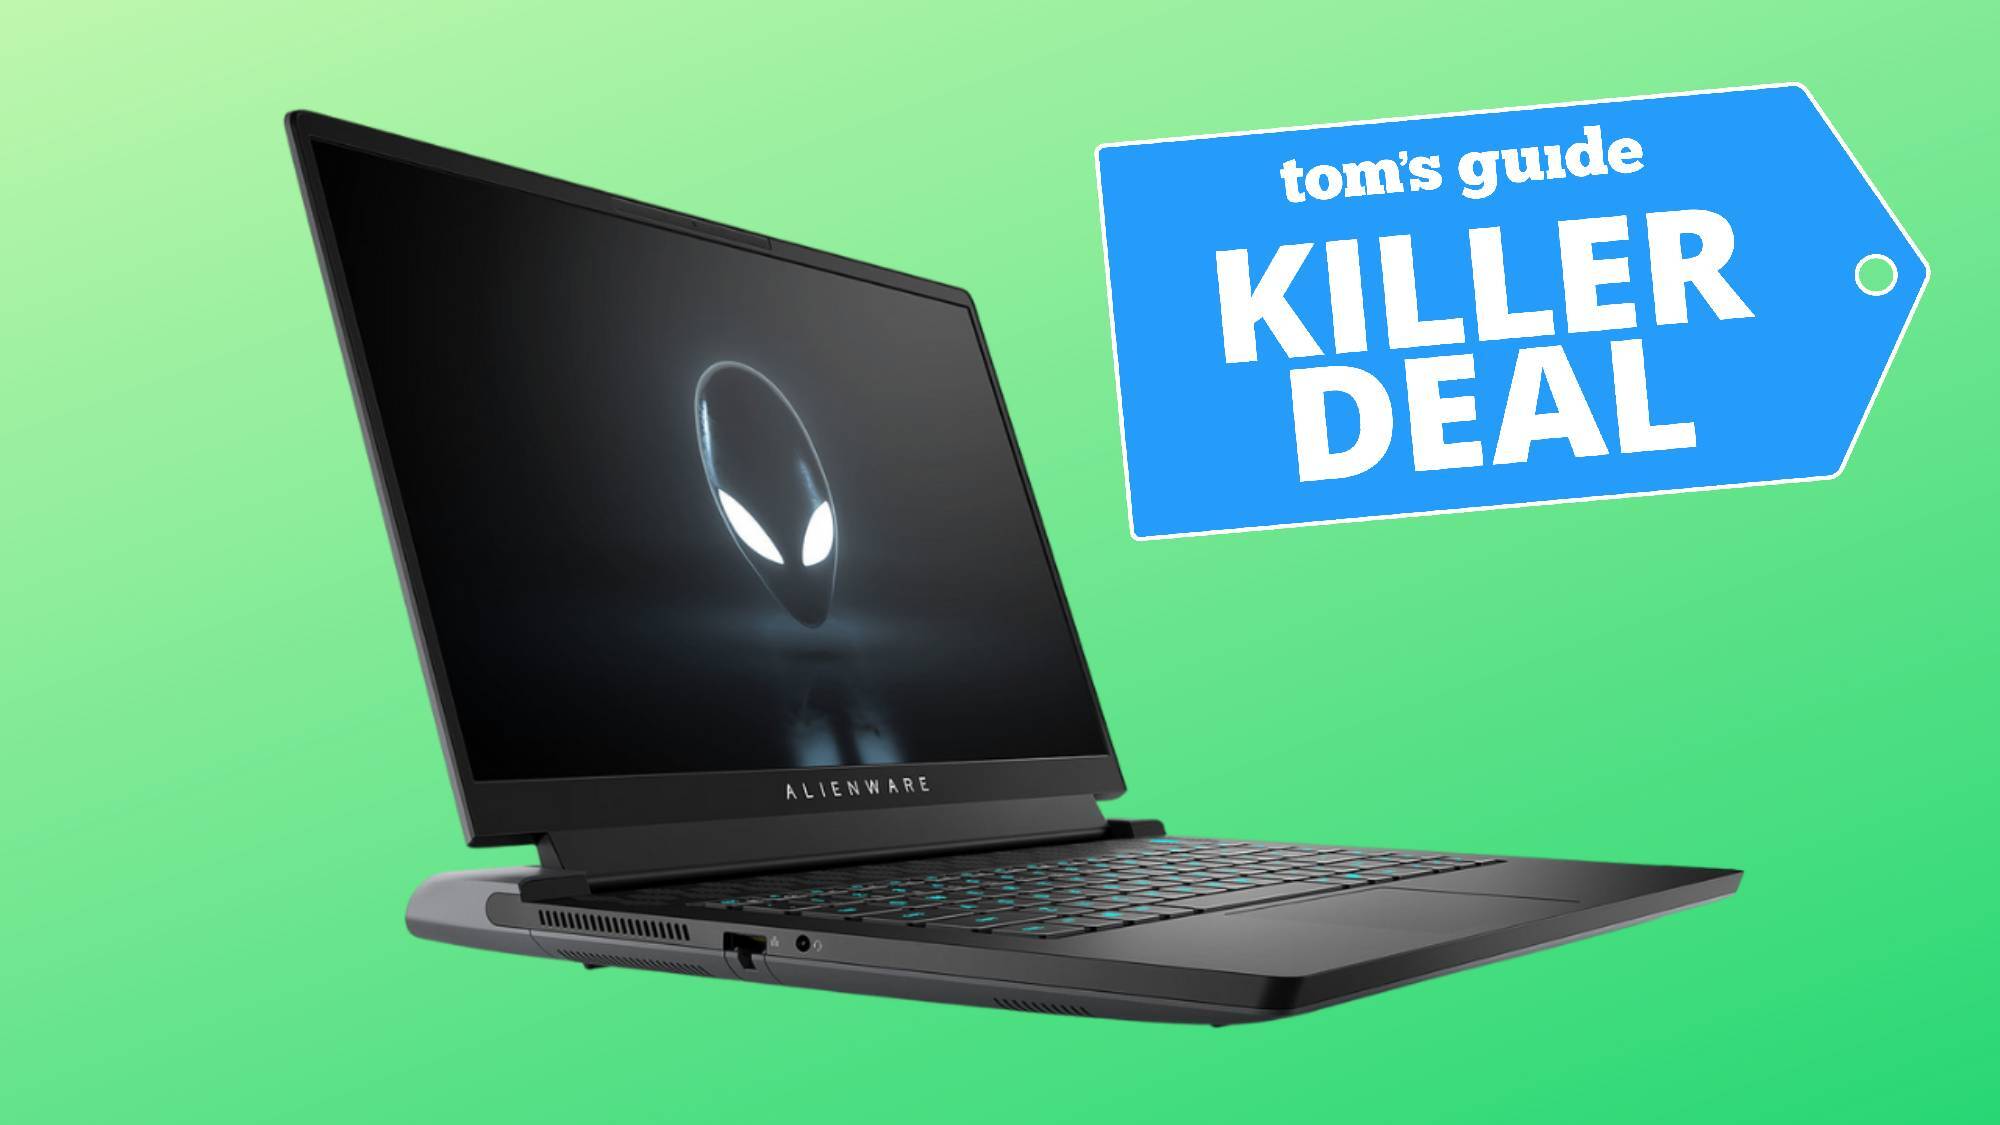 Alienware m15 R6 gaming laptop with a Tom's Guide deal tag